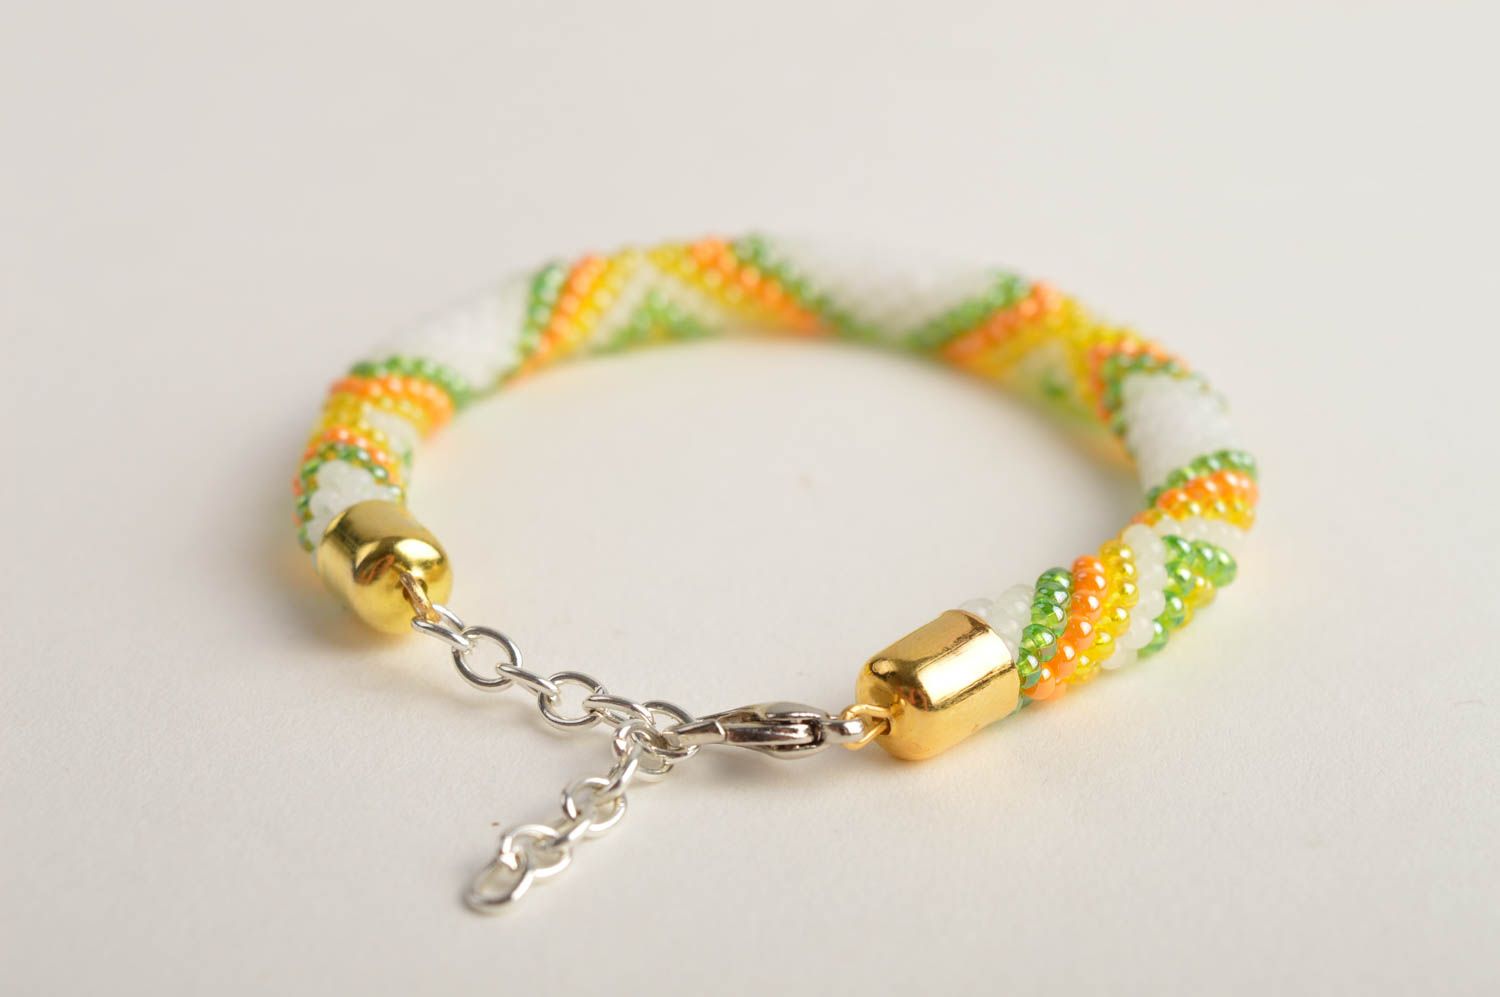 Beaded cord adjustable bracelet in light green, yellow and white color photo 3